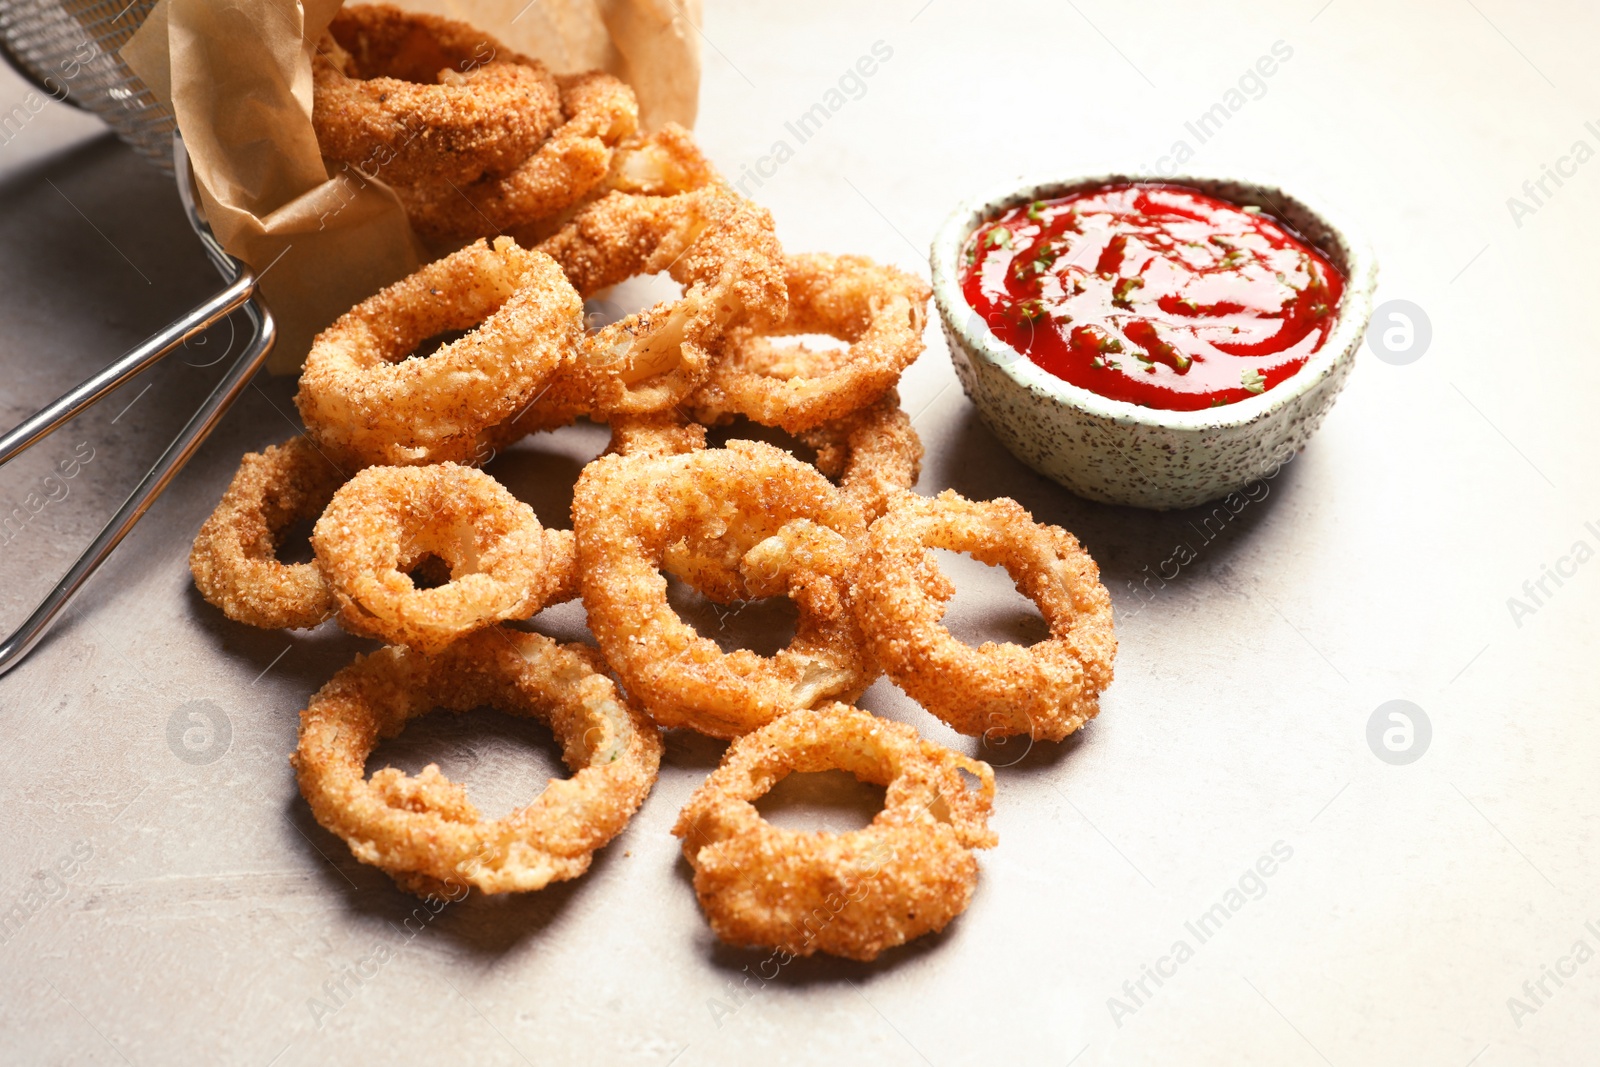 Photo of Homemade crunchy fried onion rings and tomato sauce on light background